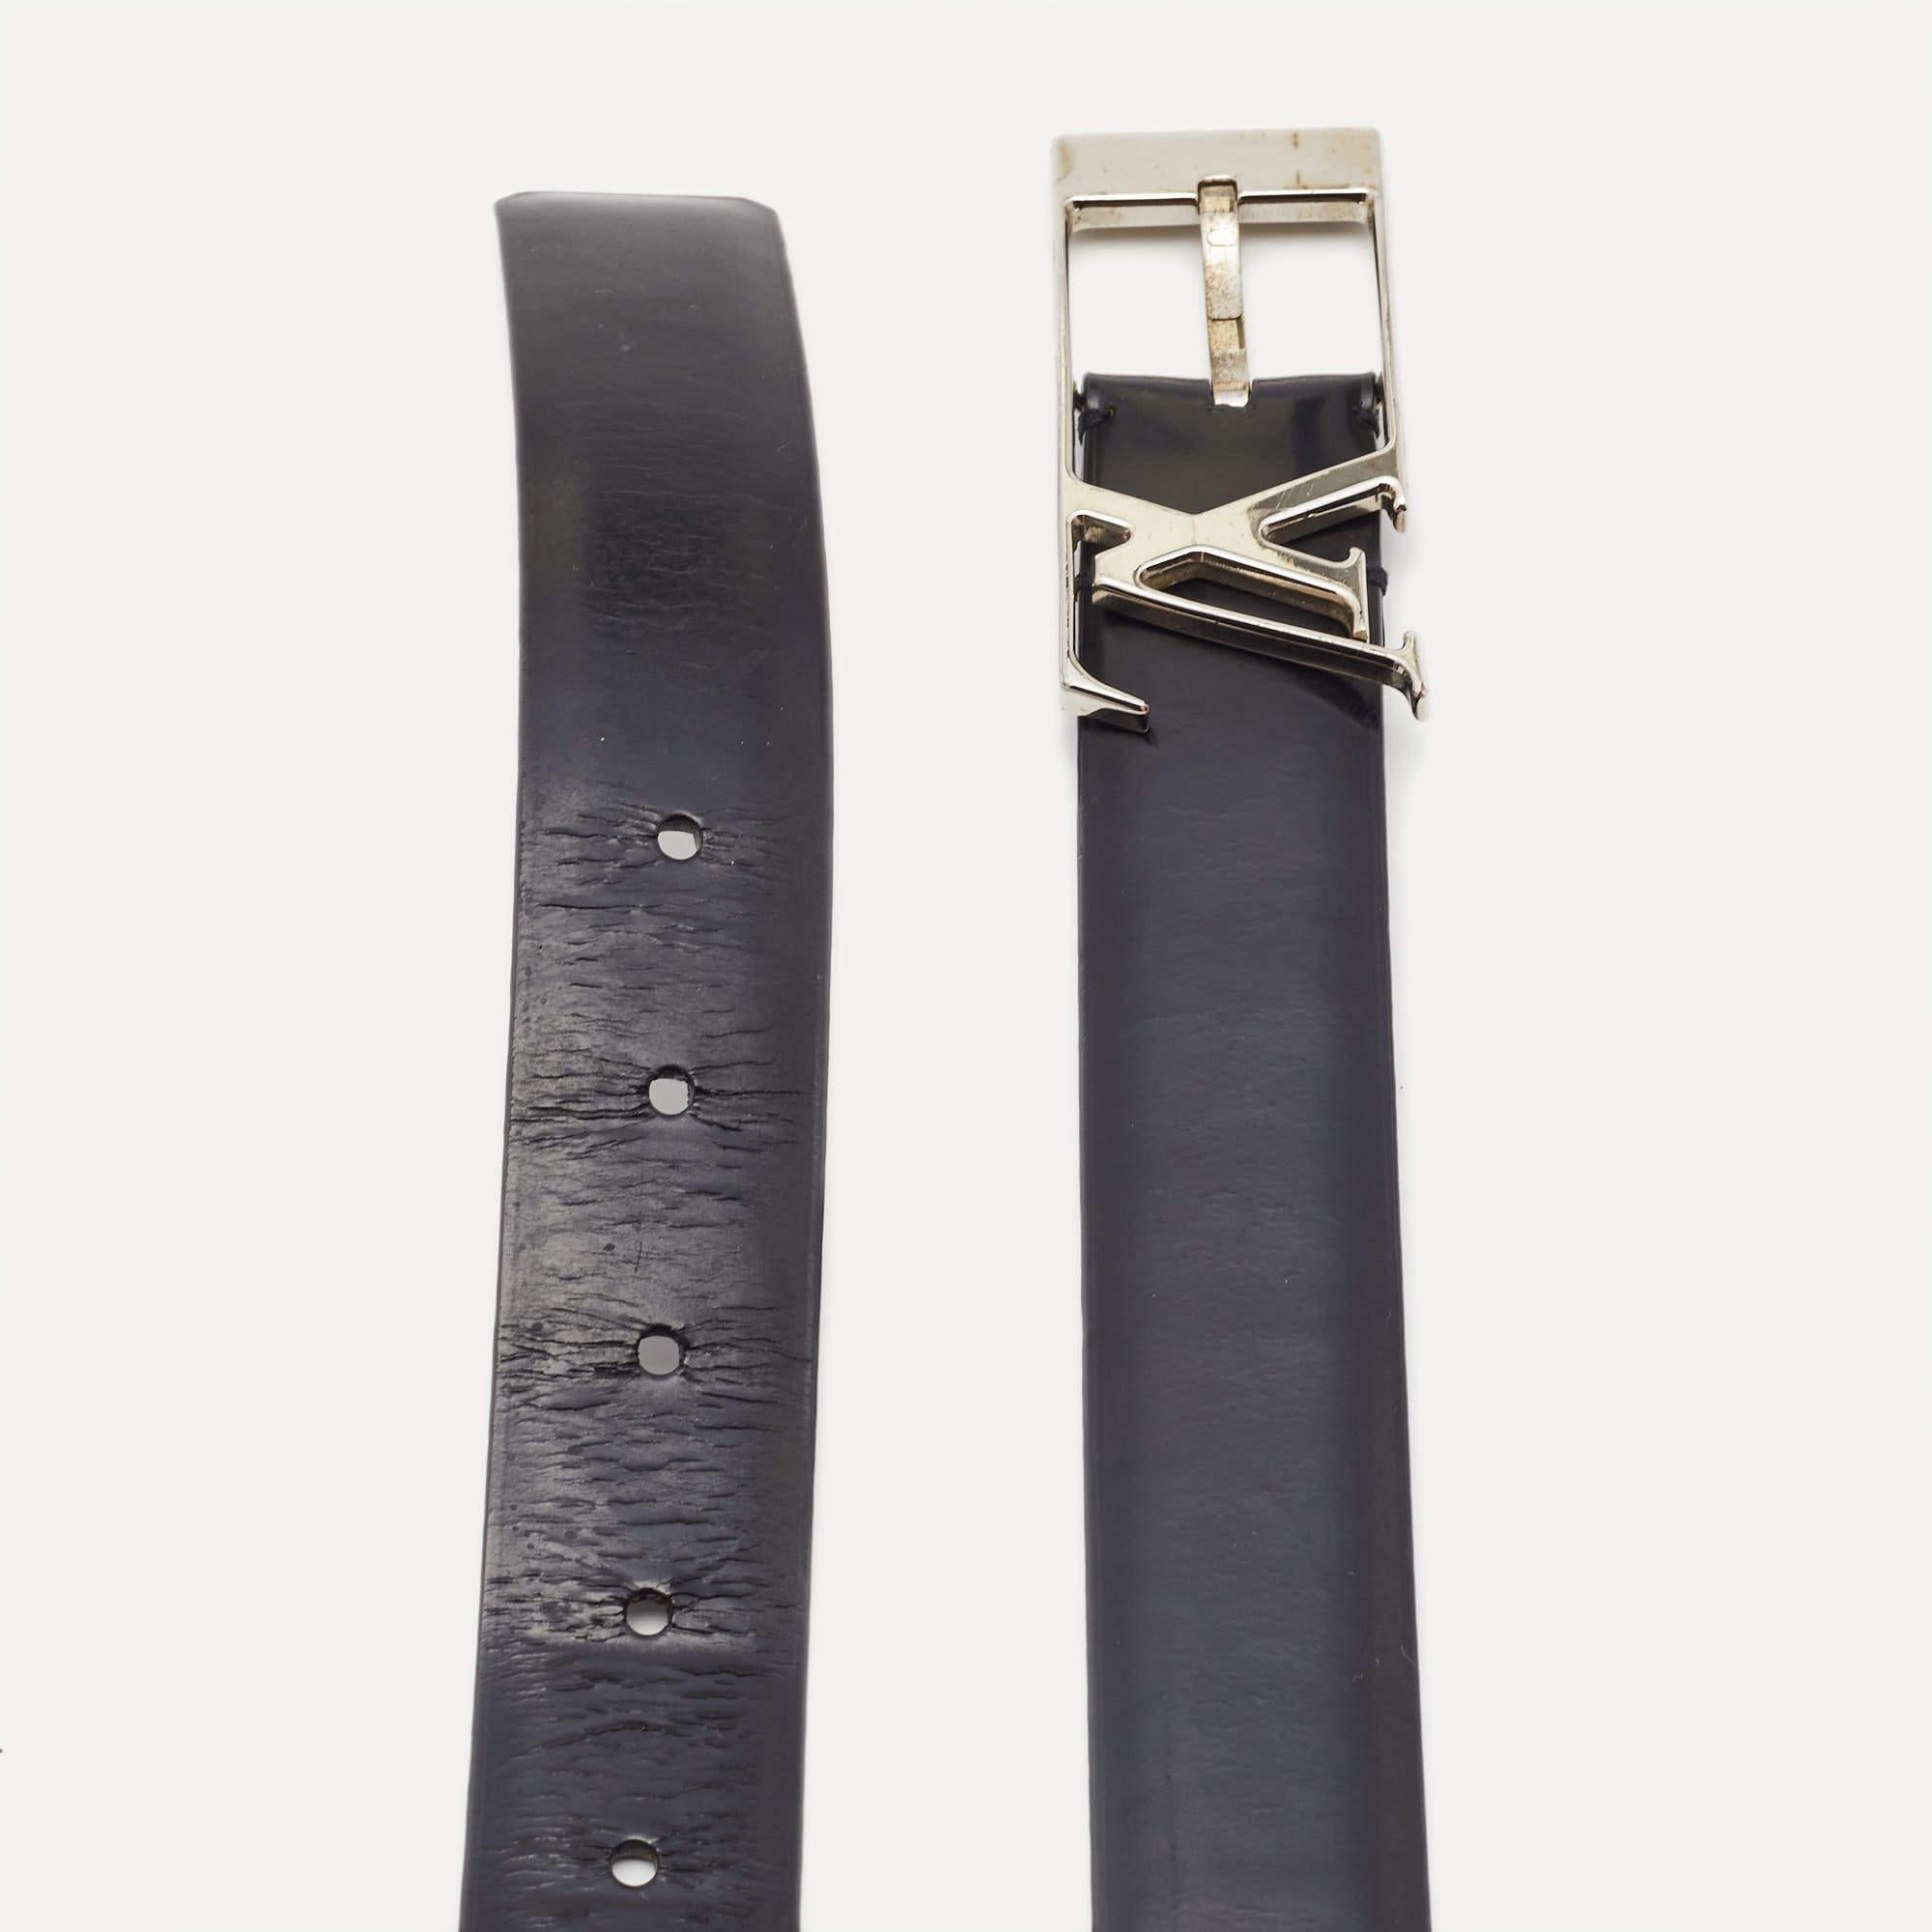 Pick this subtle piece of accessory to upgrade your formal ensembles. The Neogram belt from Louis Vuitton is crafted with black leather. It features an LV logo and a buckle closure in silver-tone hardware.

